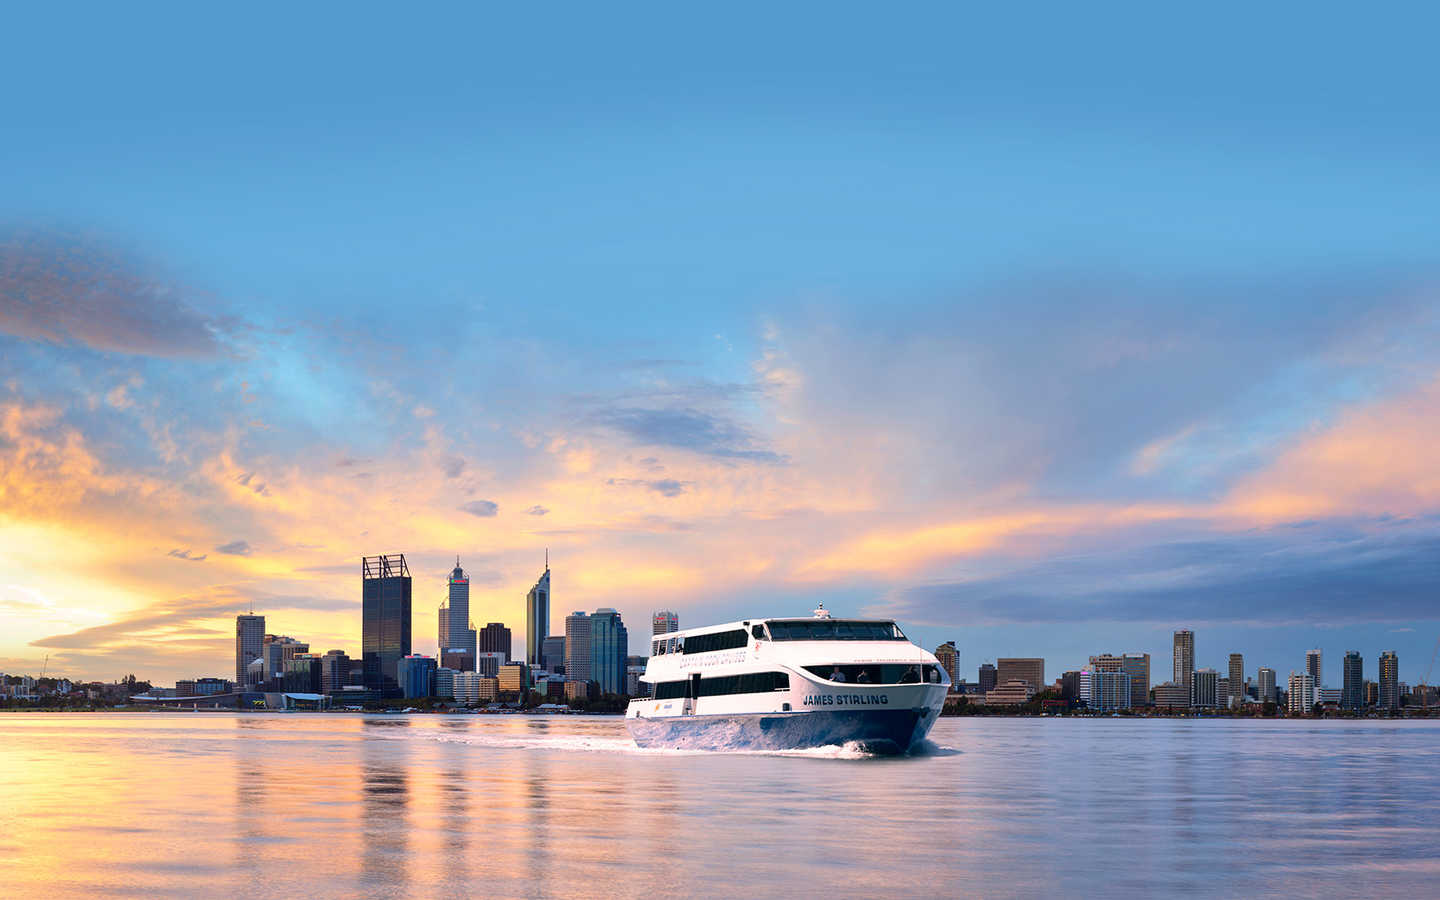 Enjoy a cruise down the Swan River with Captain Cook Cruises